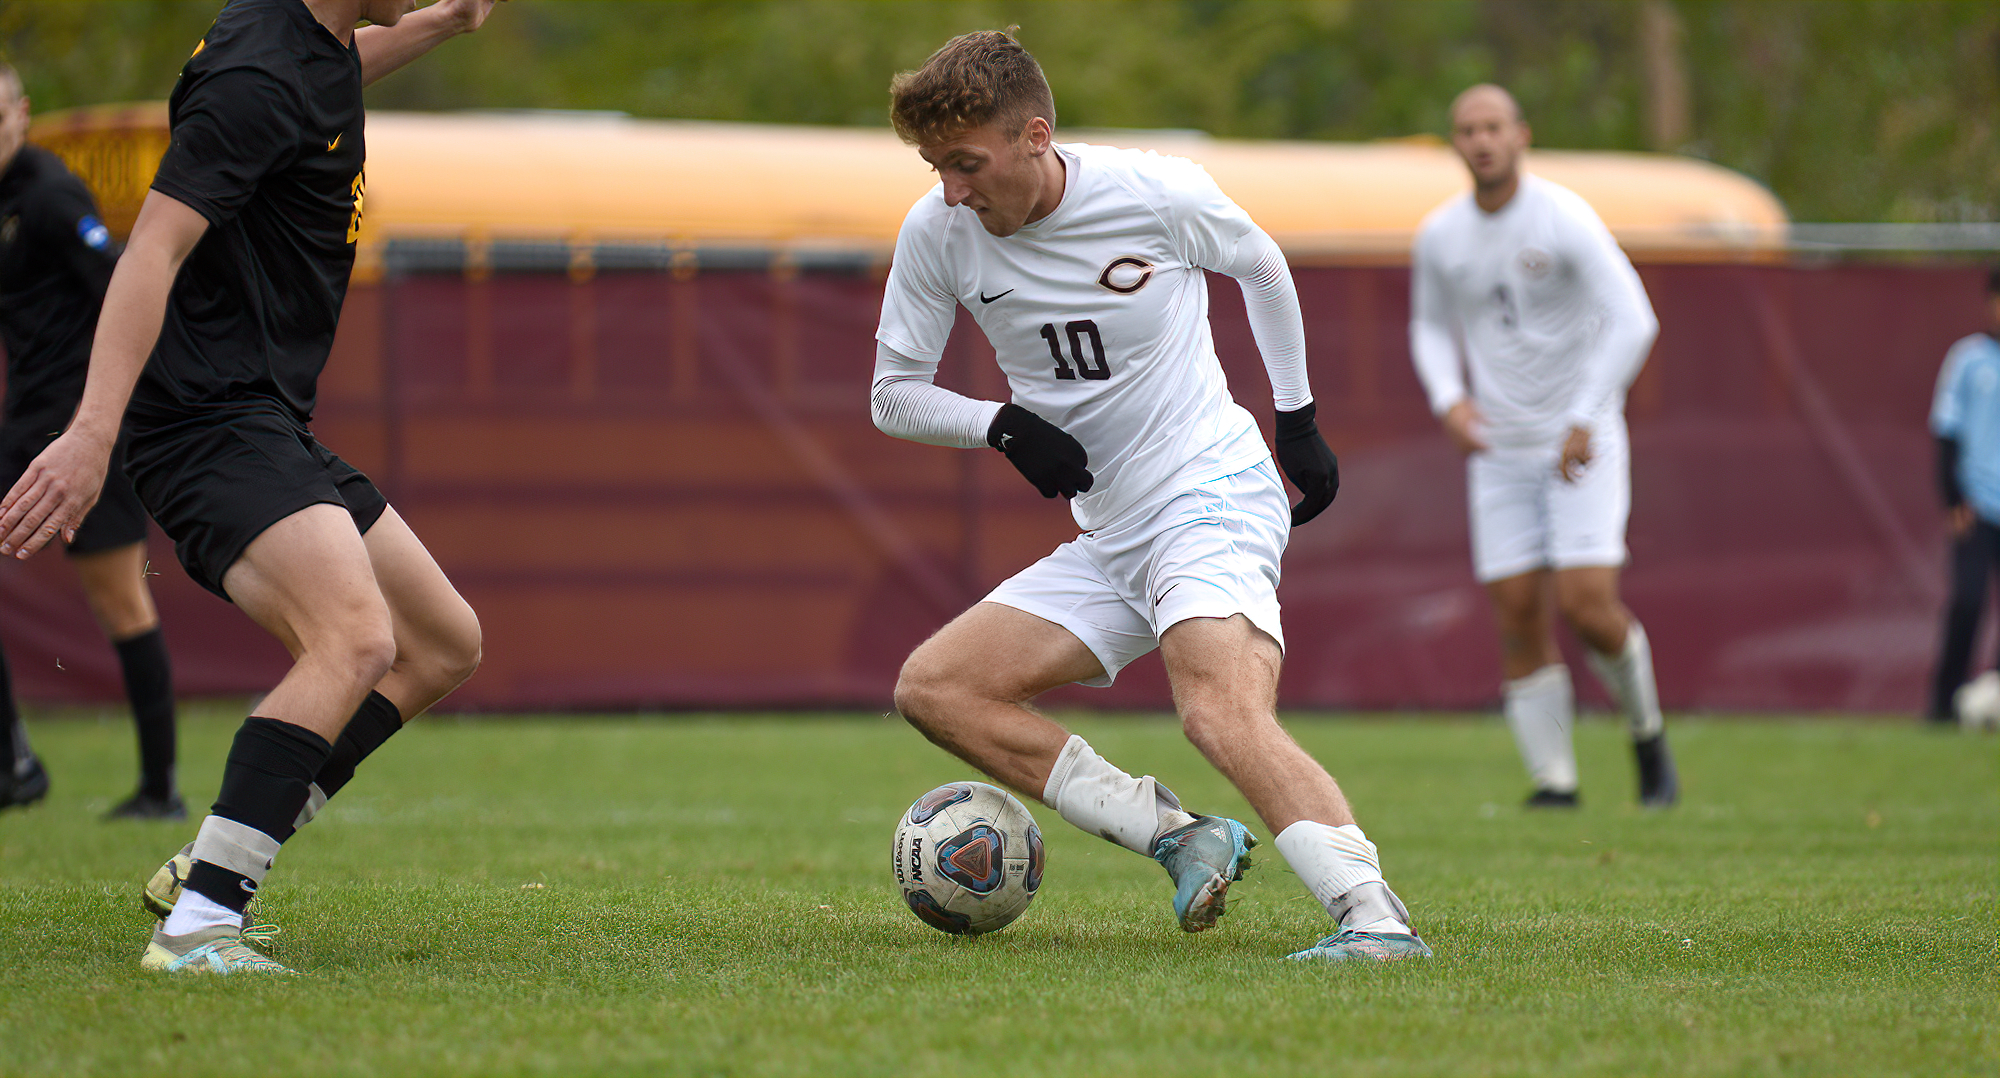 Gannon Brooks scored his sixth goal of the year in the Cobbers' game at regionally-ranked UW-Whitewater.